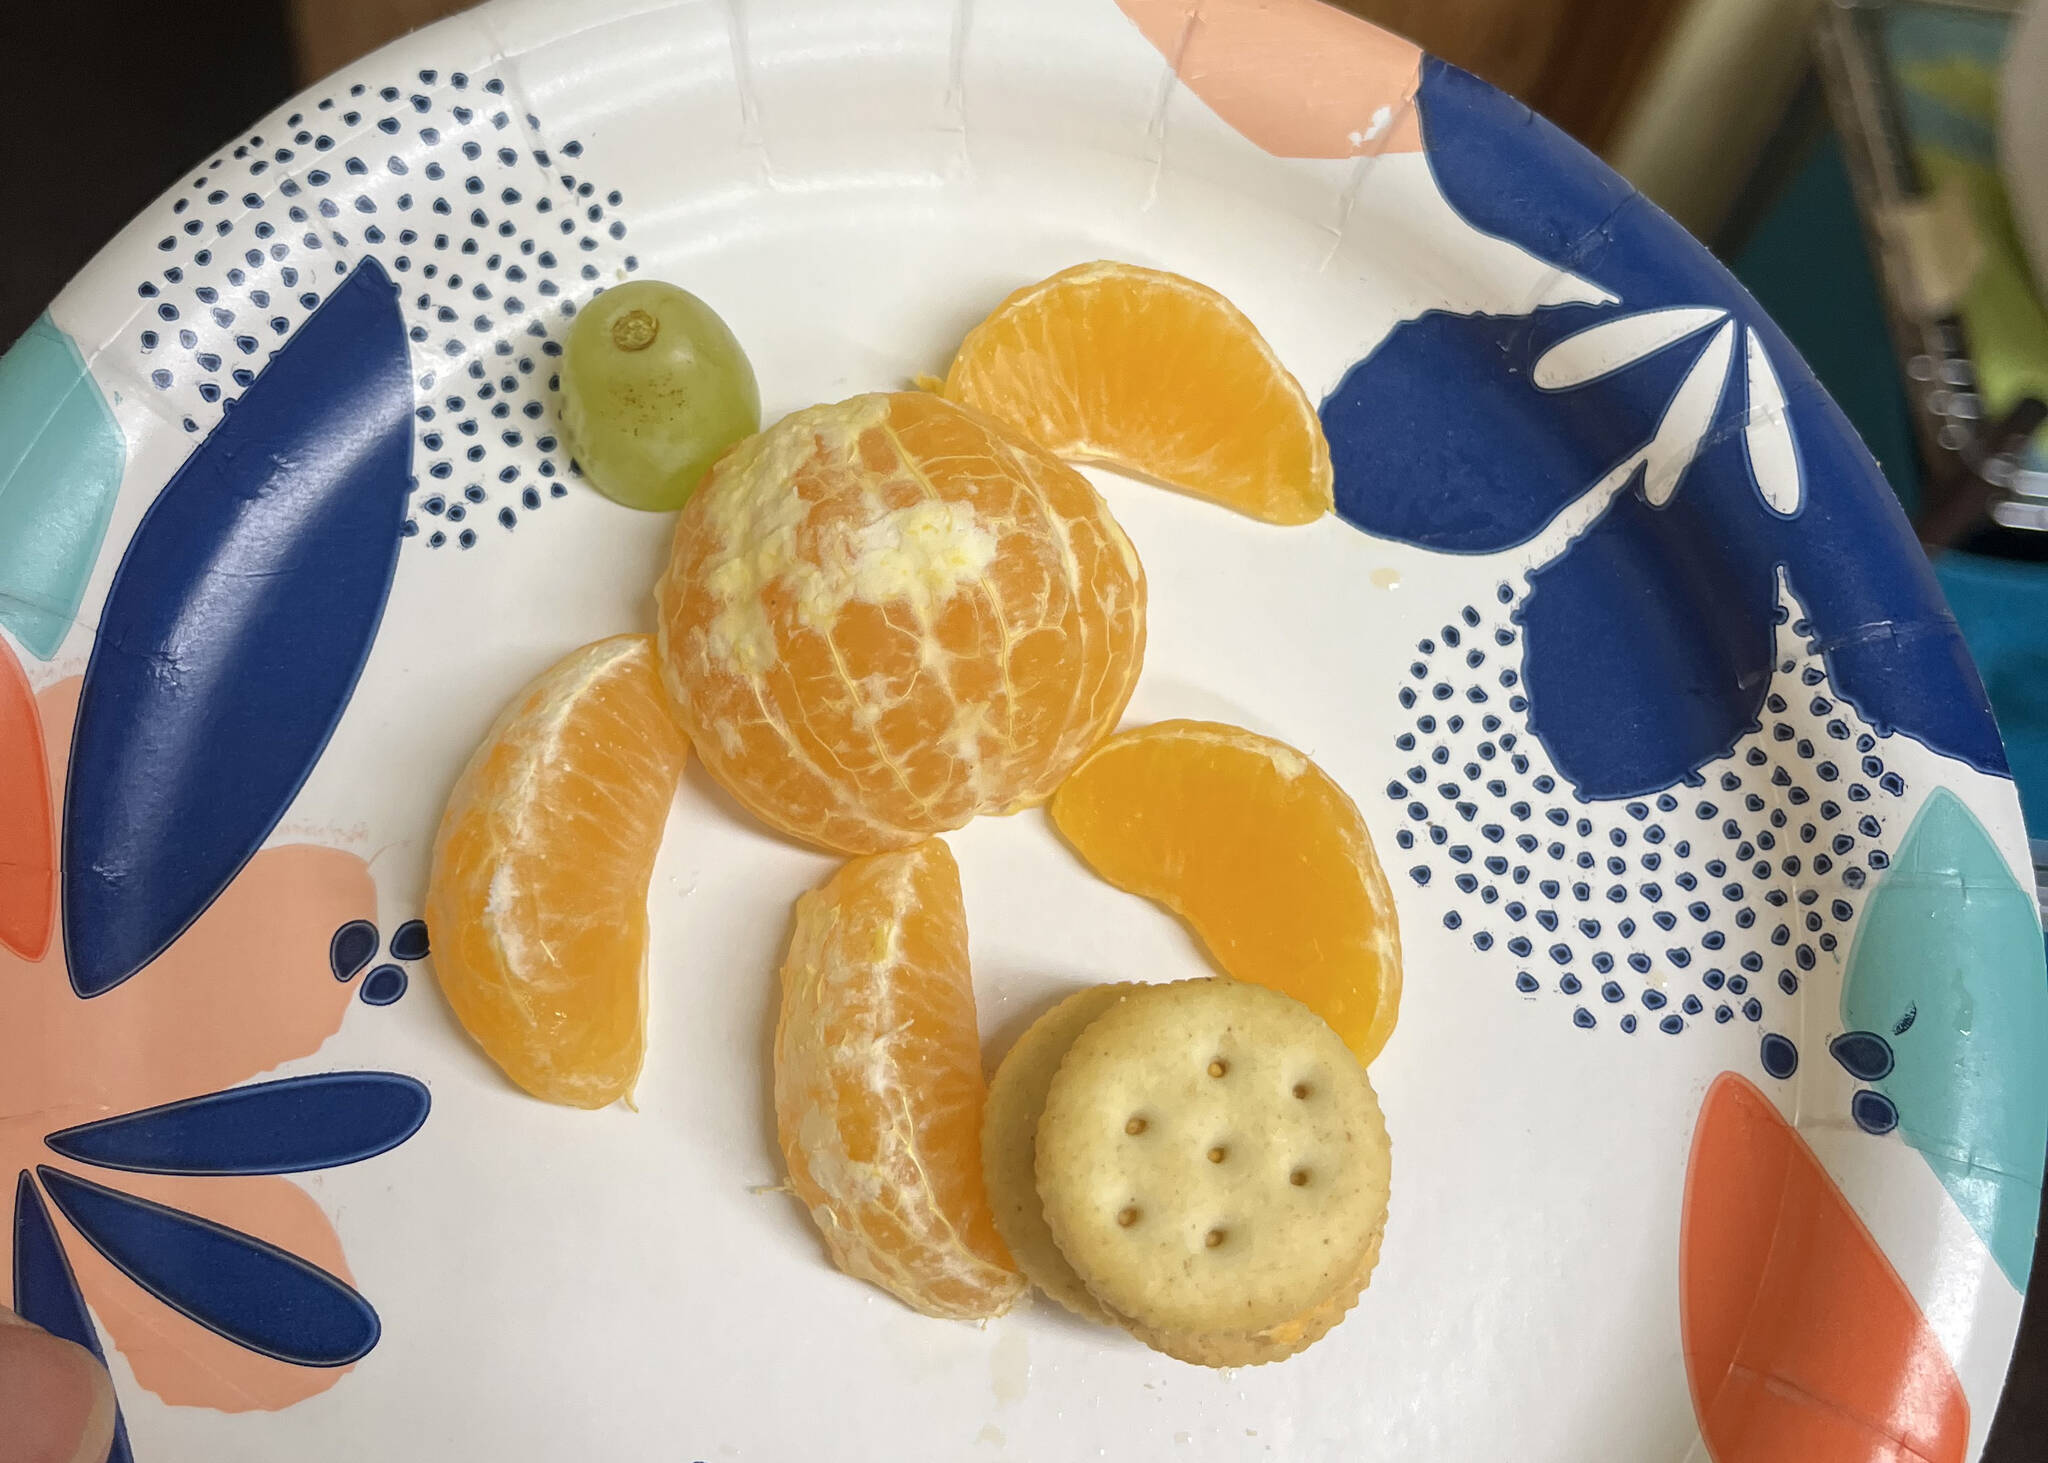 A turtle is made out of kid-friendly snacks for Vacation Bible School. (Photo courtesy Meredith Harber)